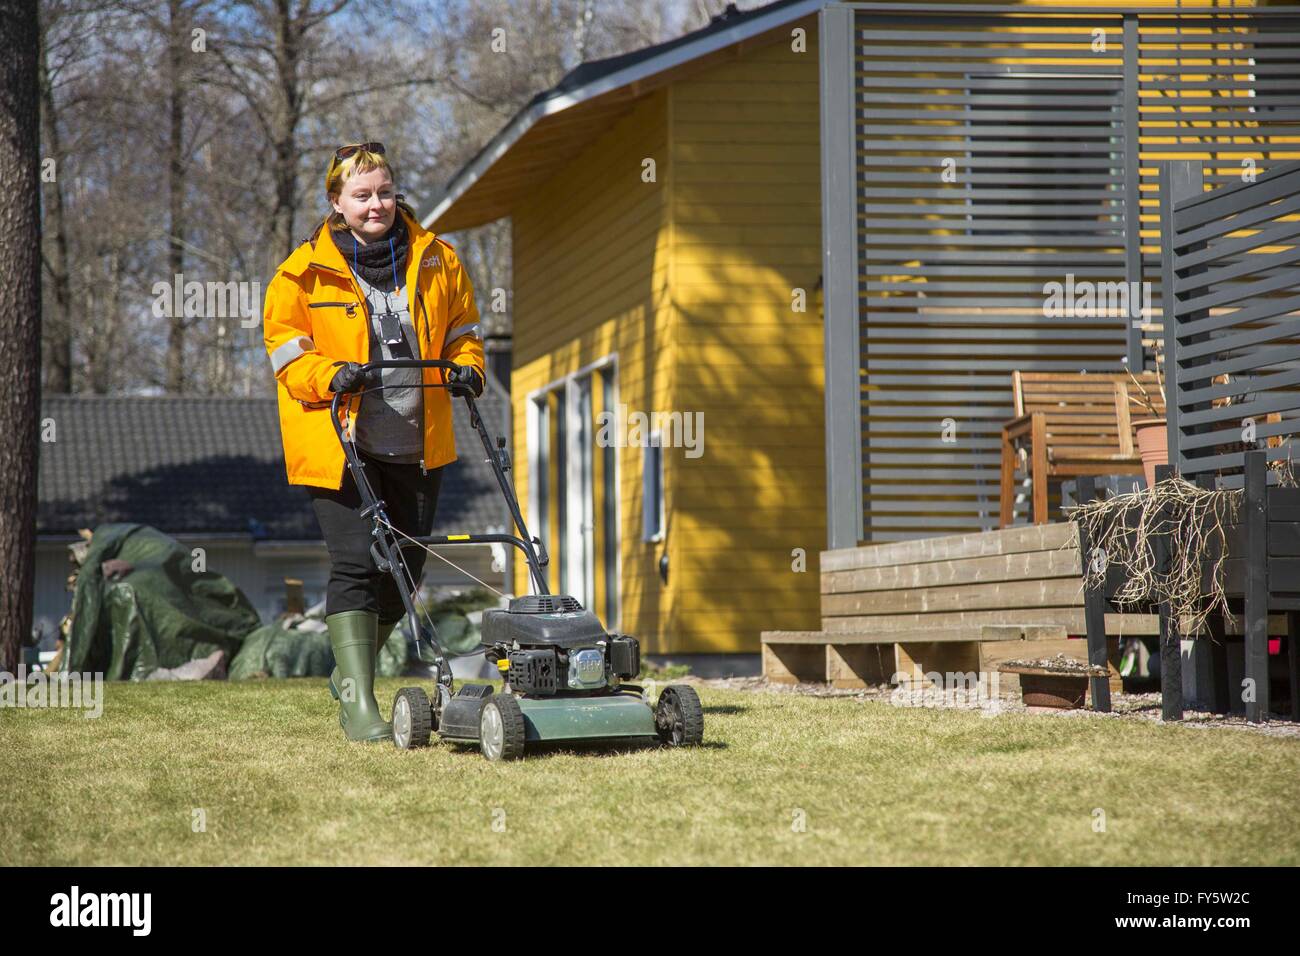 (160422) -- HELSINKI, April 22, 2016 (Xinhua) -- Photo provided by the The Finnish post office, Posti on April 21 shows a postwoman mowing lawns at a house in Finland. People who want their lawns mowed during the summer will now be able to ask a postman or postwoman to do it. The Finnish post office, Posti, is launching a service offering lawn mowing as part of its Tuesday deliveries. (Xinhua) Stock Photo